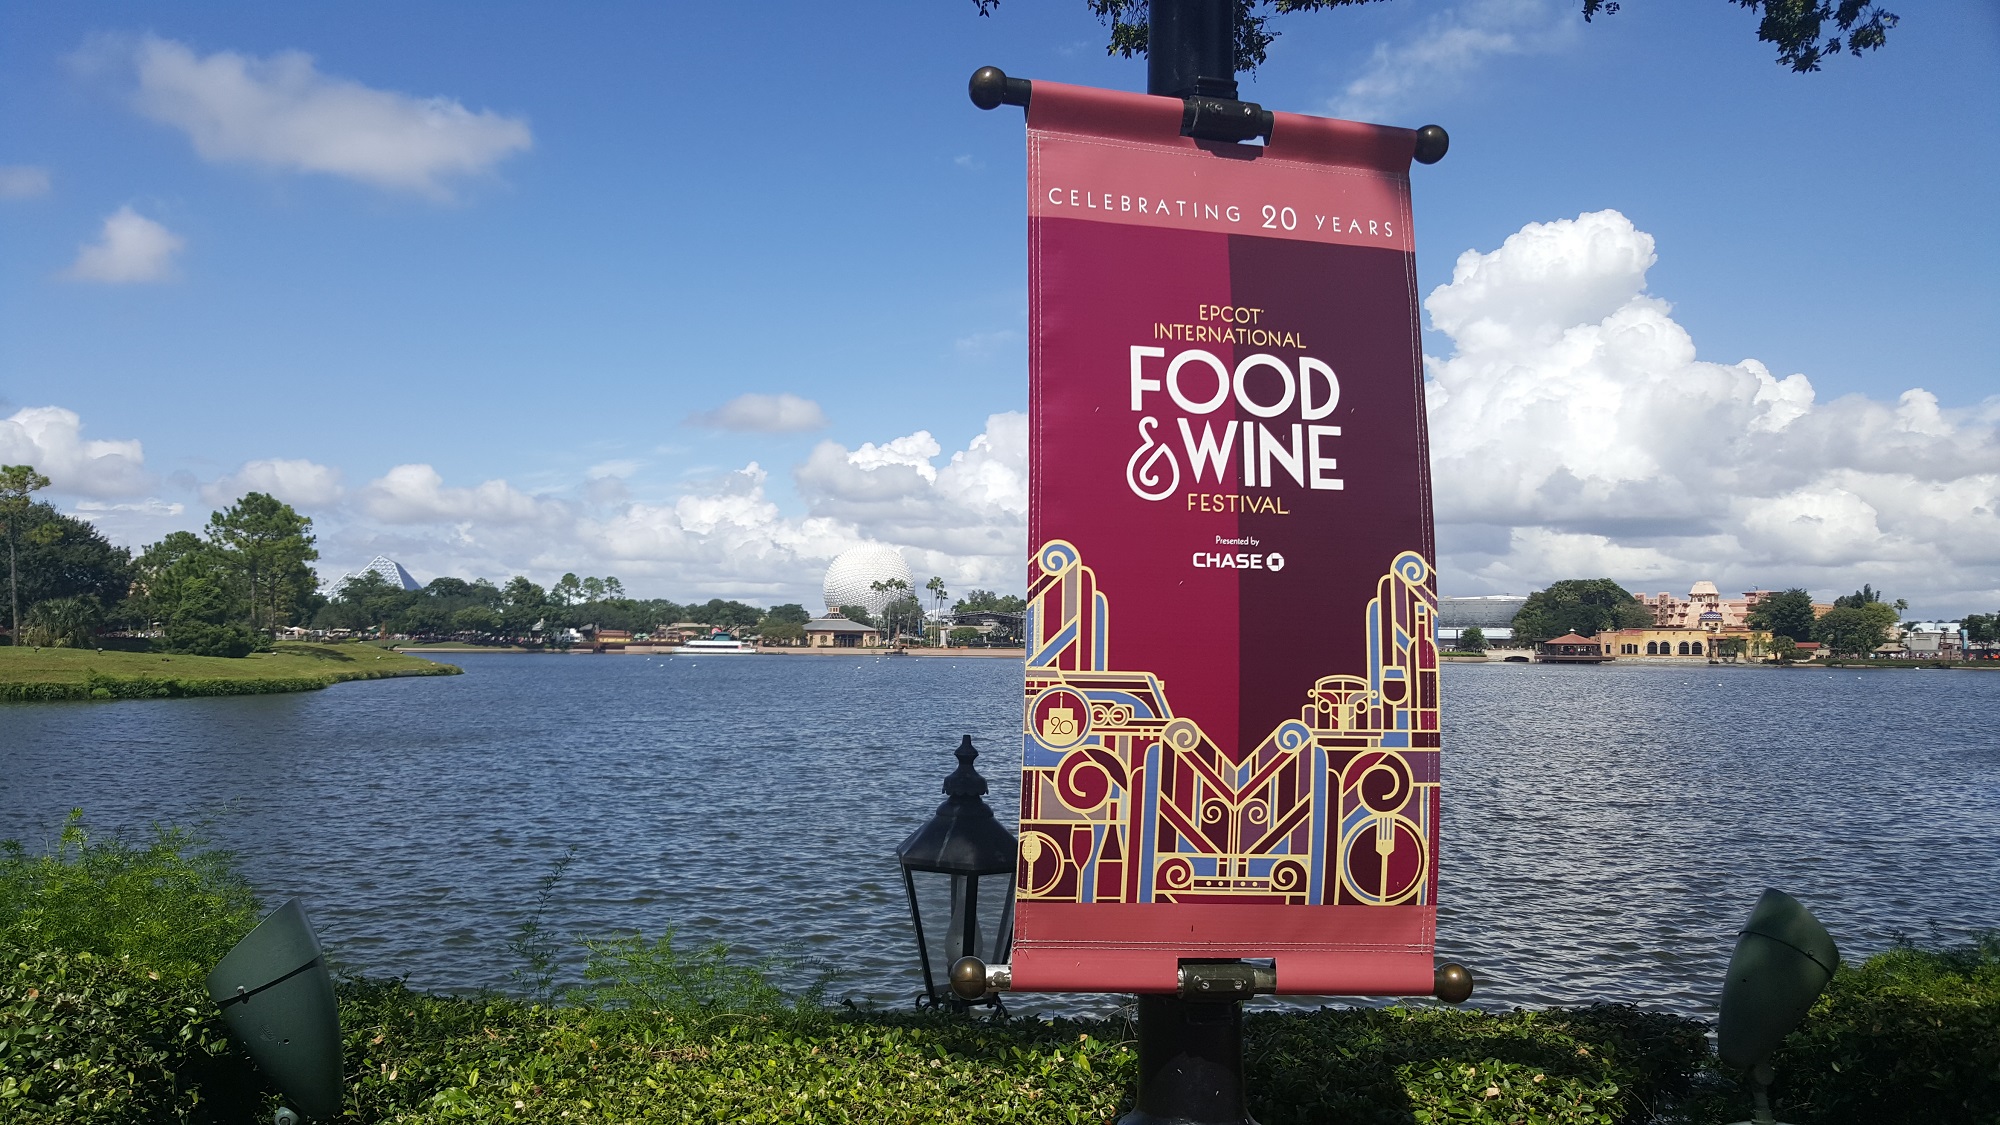 2017 Epcot Food and Wine Festival starting August 31st, 2017!